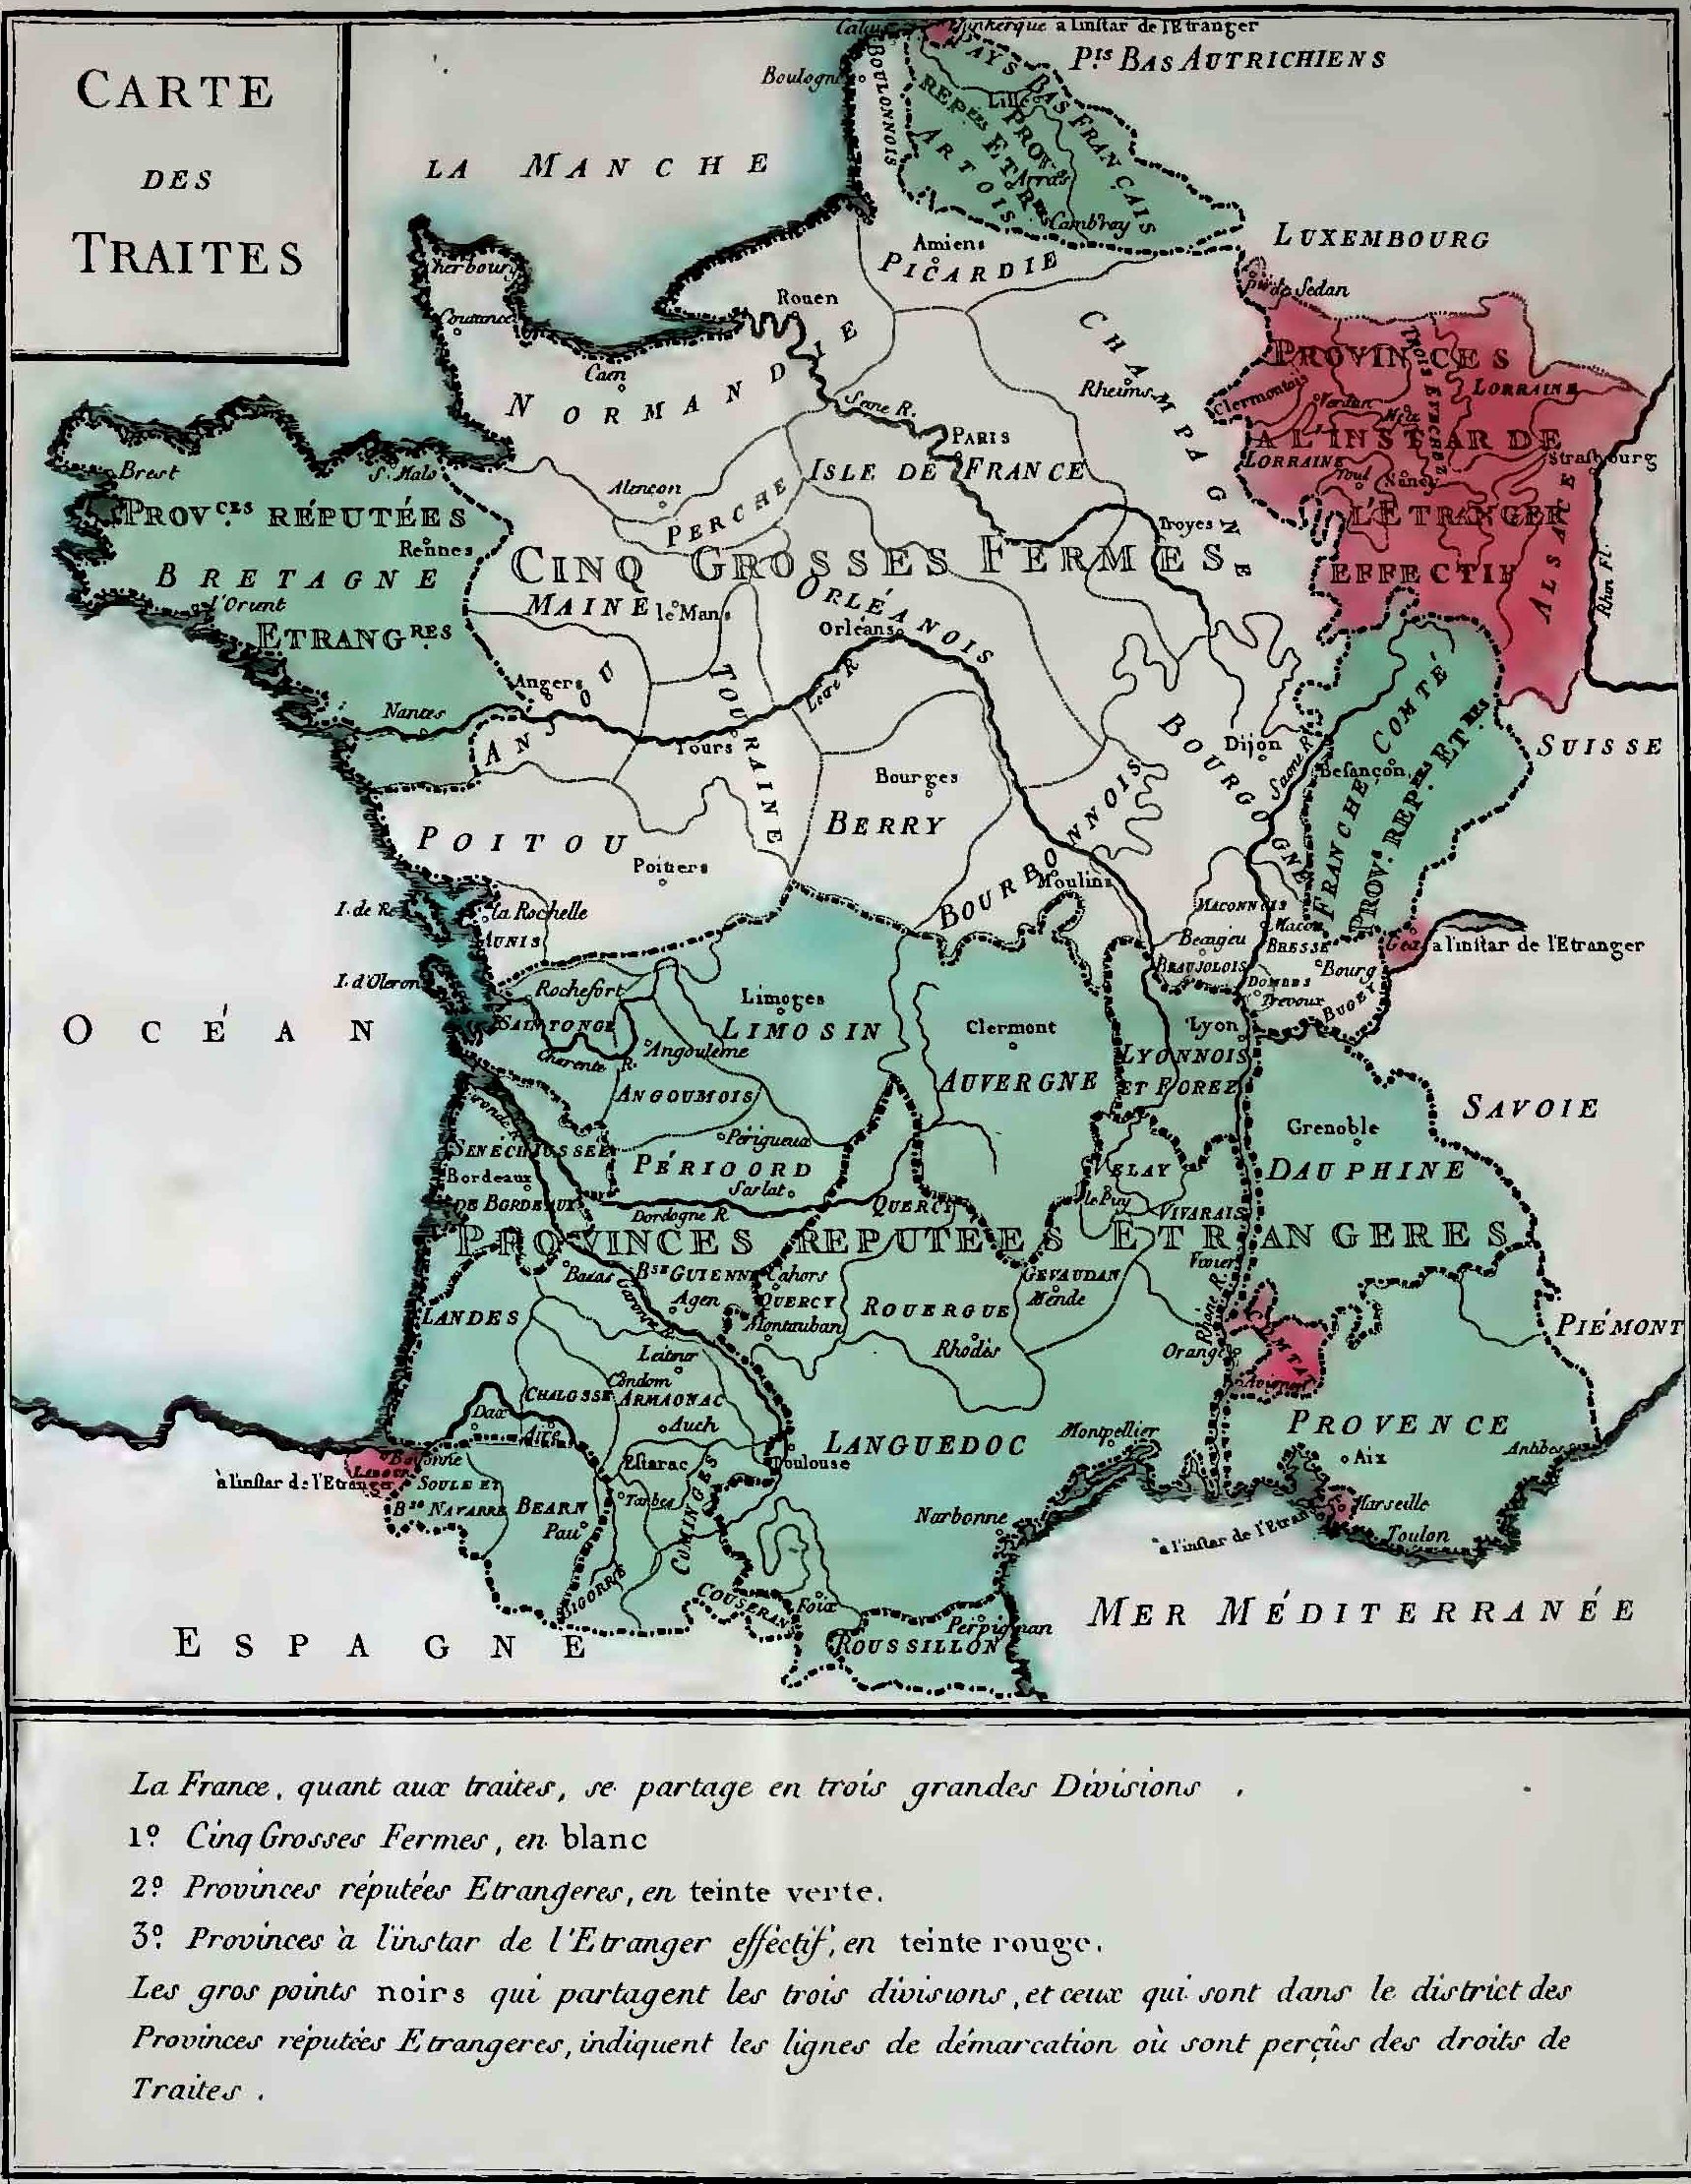 Trade map of France in 1781